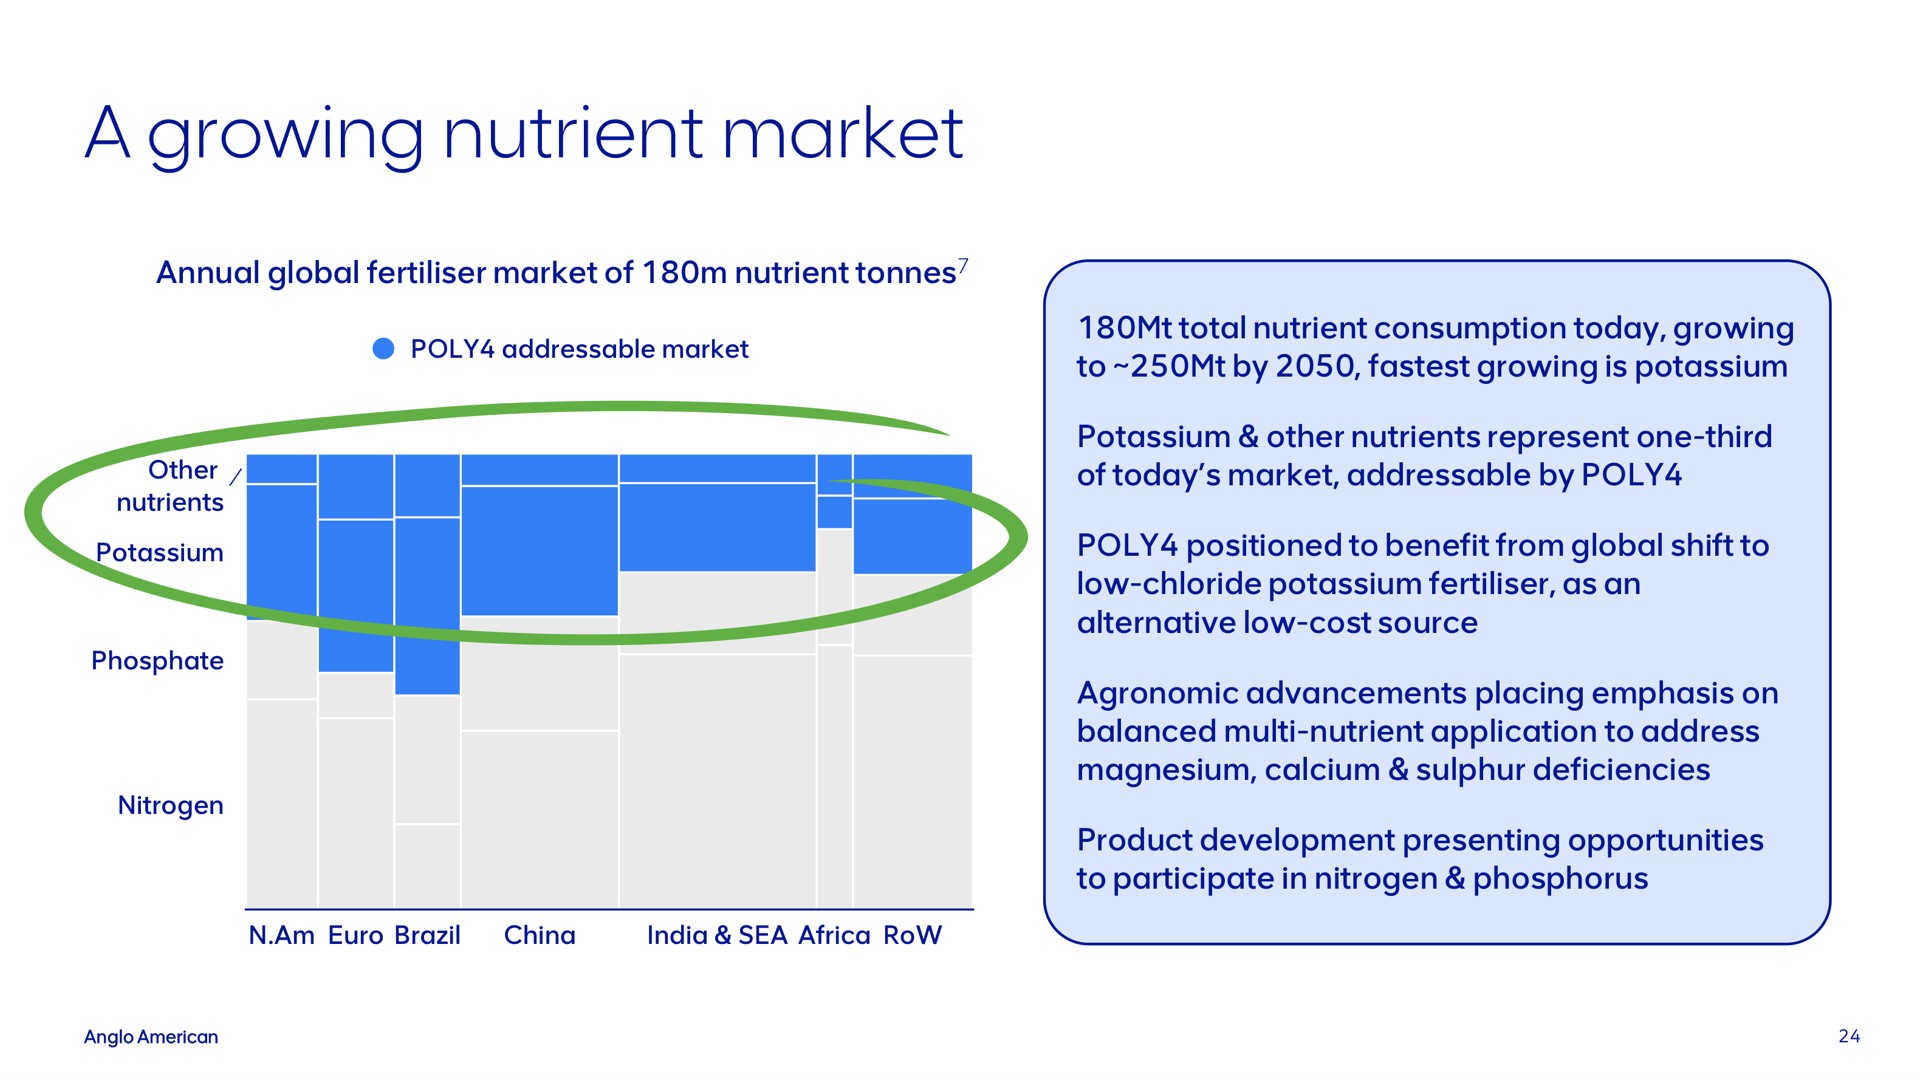 a growing nutrient market | AngloAmerican